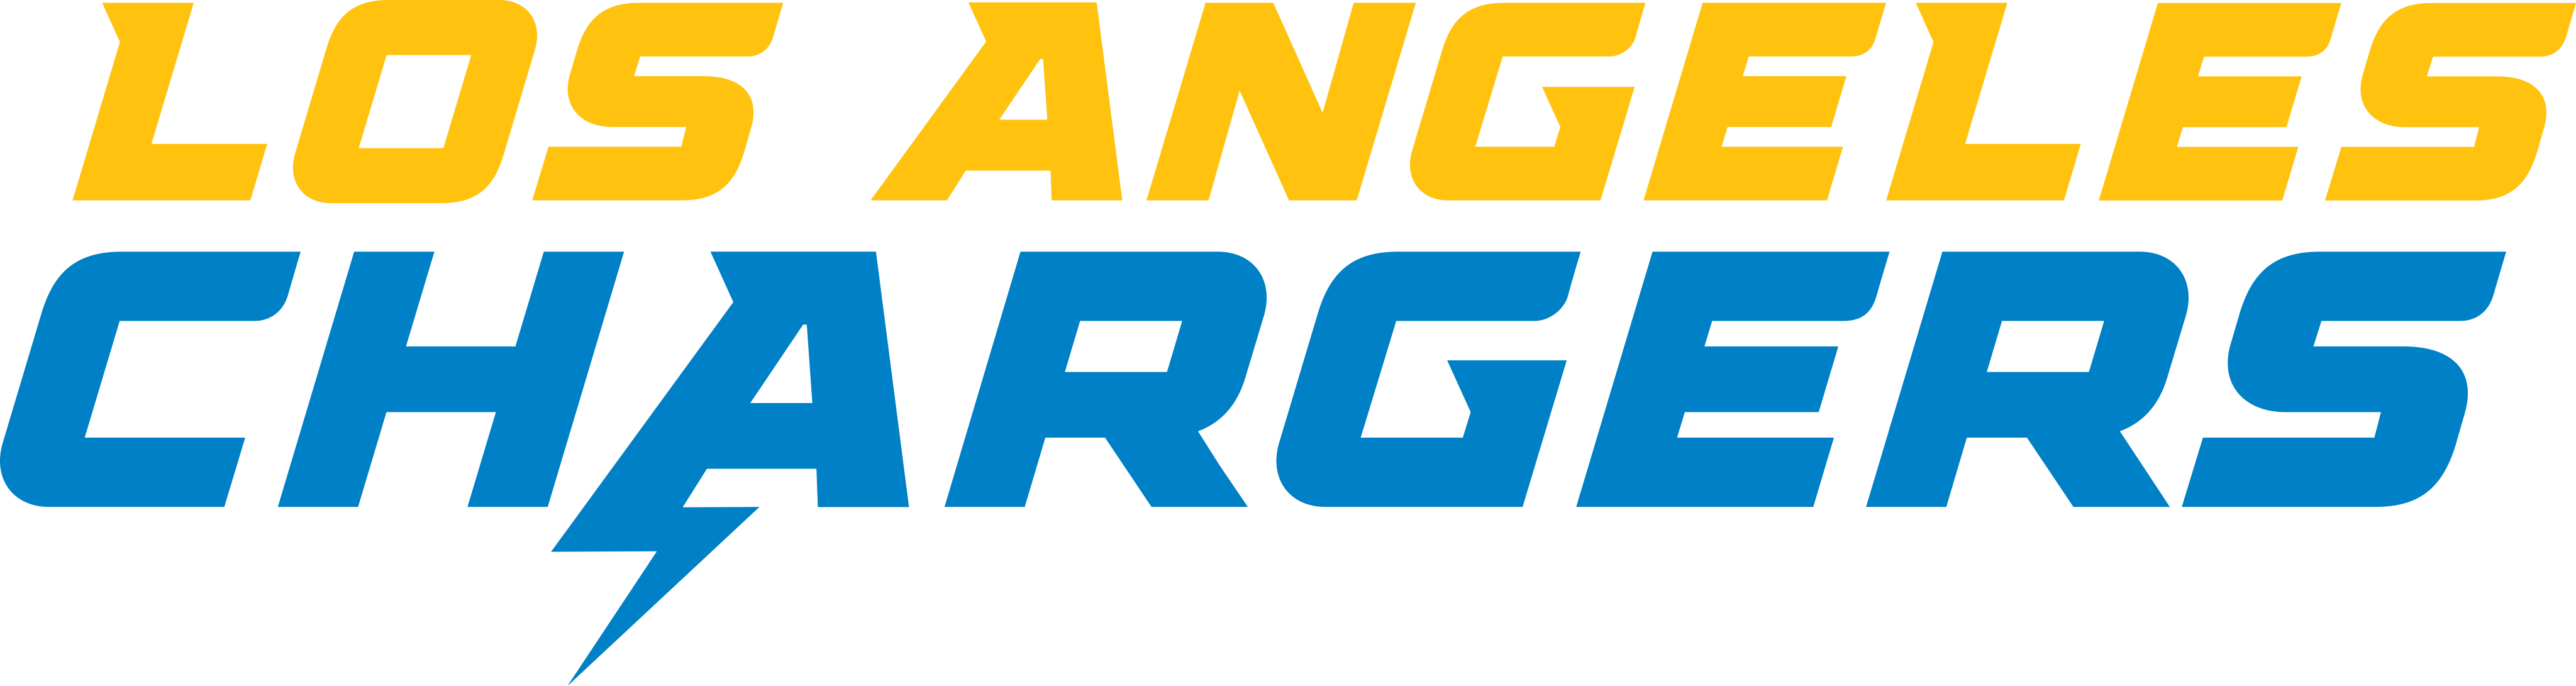 los angeles chargers logo 1 - Los Angeles Chargers Logo